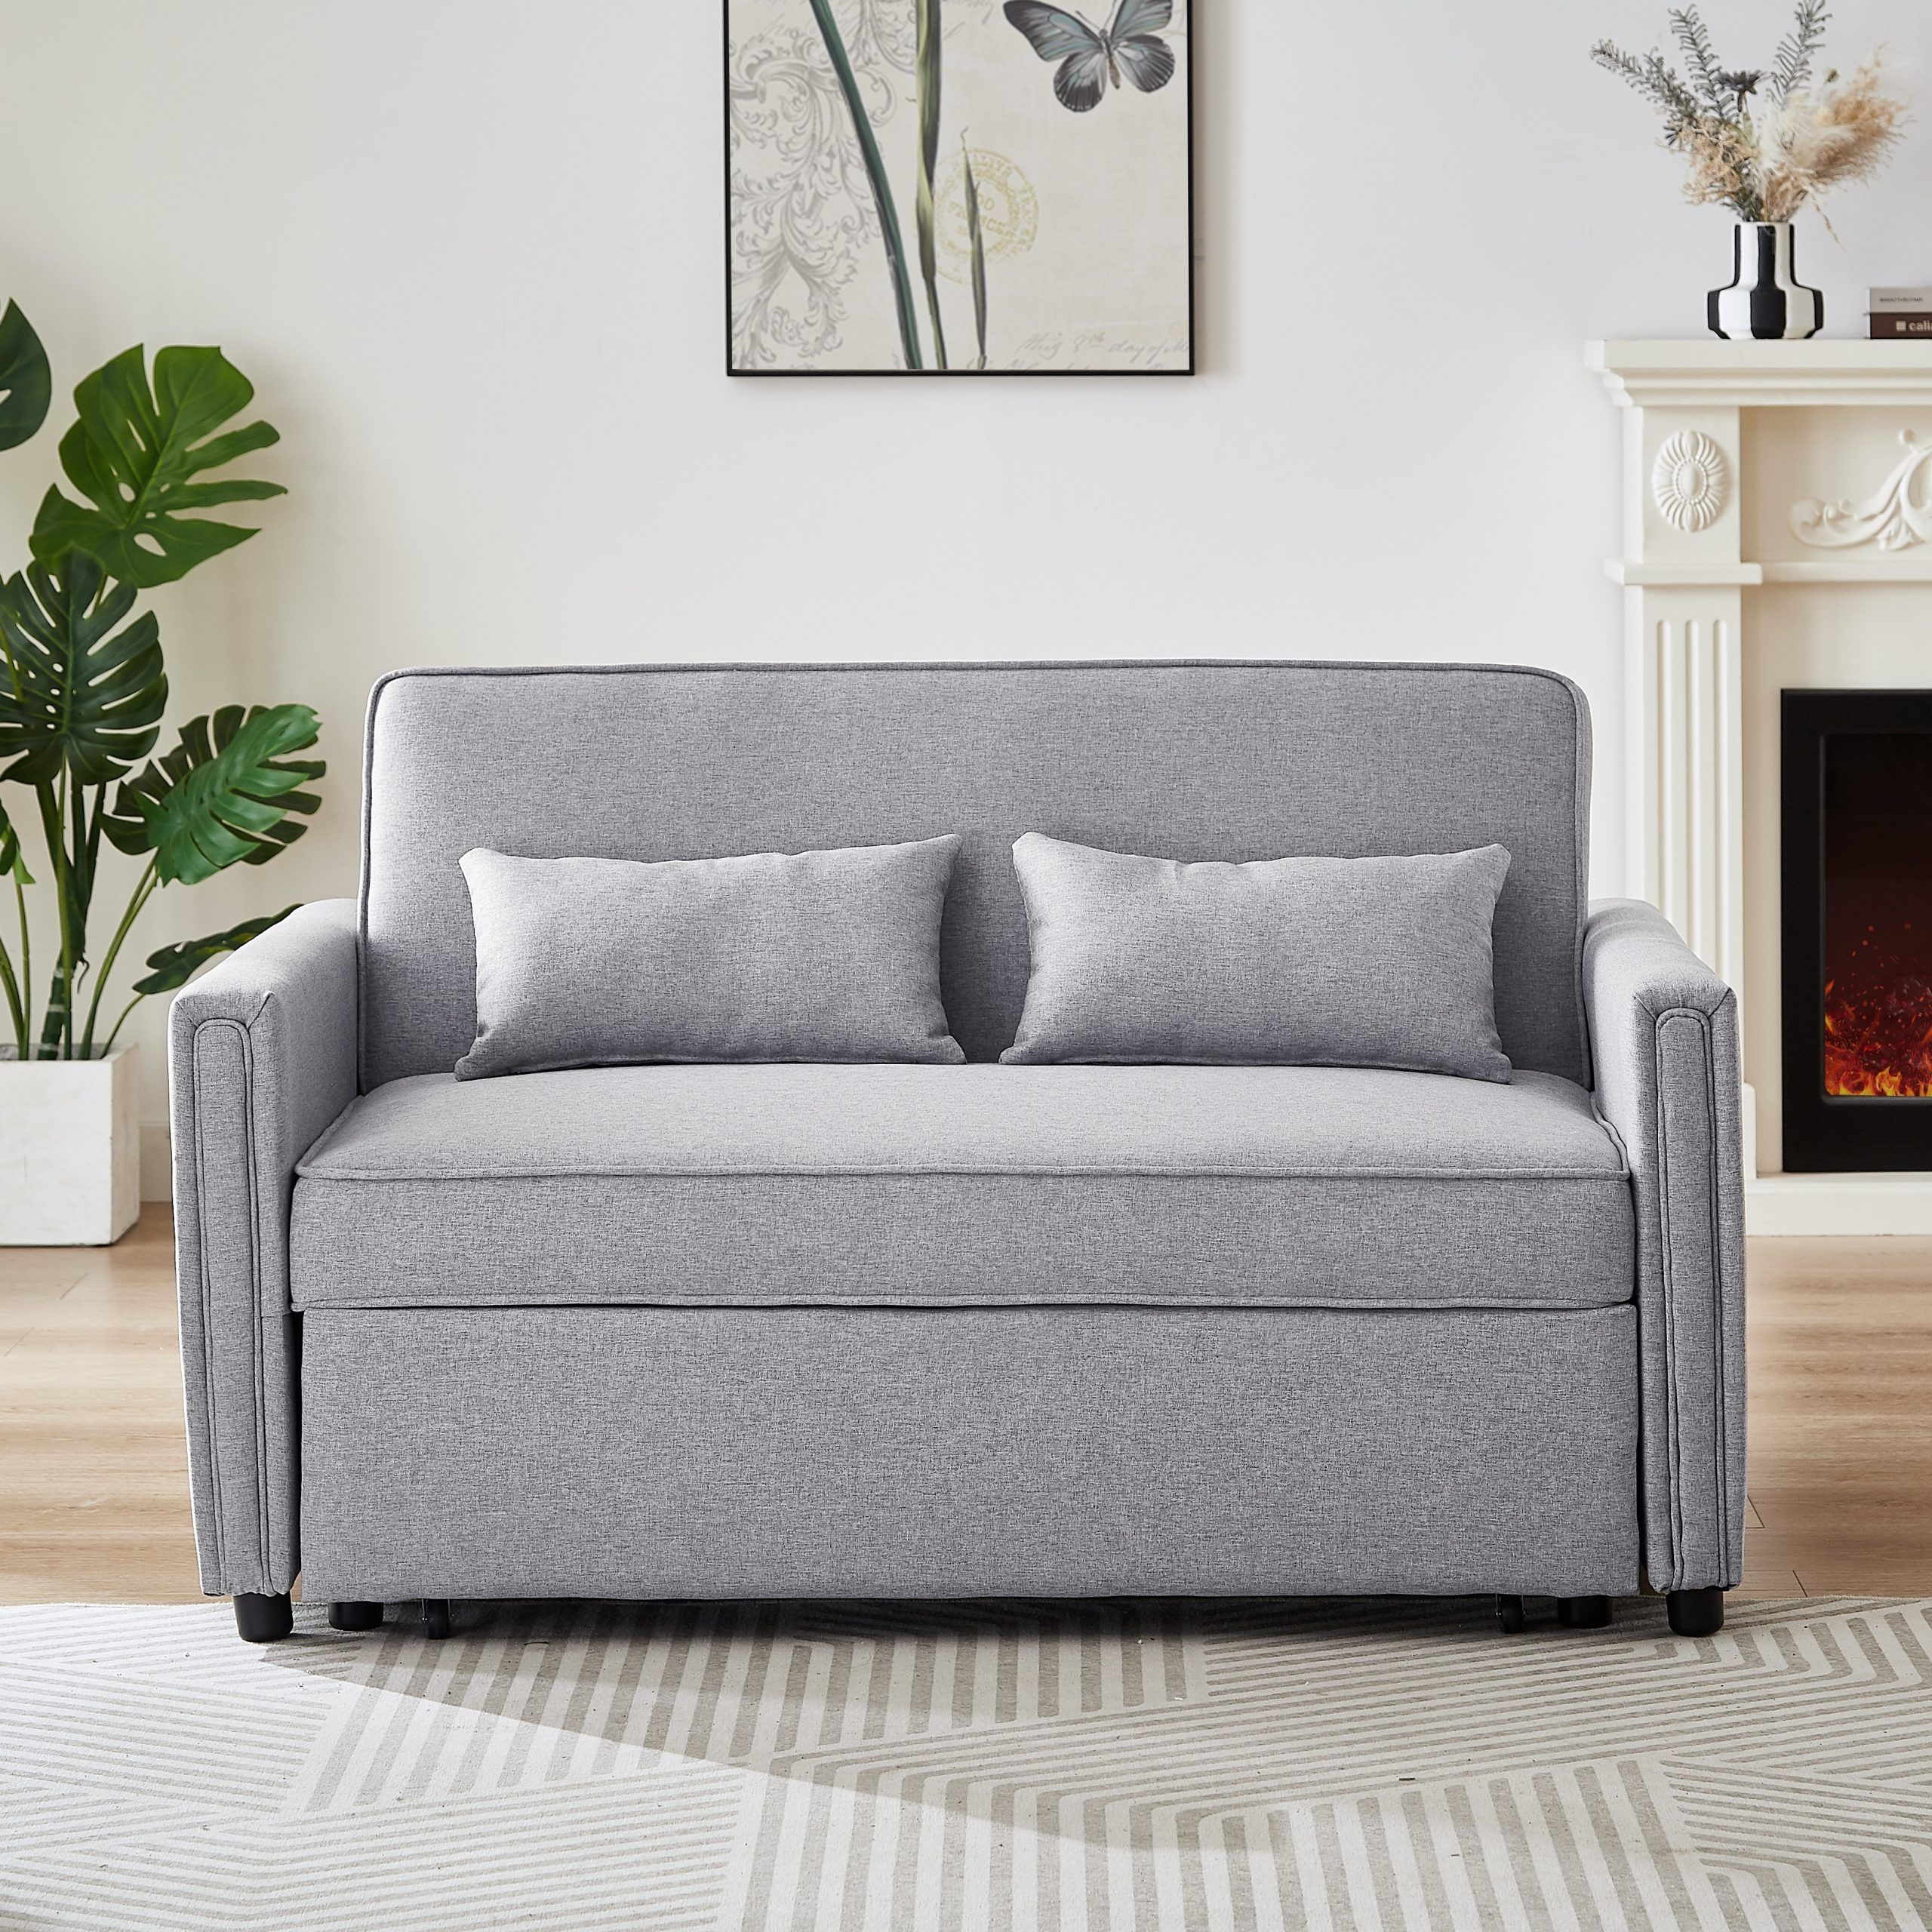 Linen Convertible Loveseat Sleeper Sofa Couch With Adjustable Backrest –  Bed Bath & Beyond – 38369360 For Convertible Gray Loveseat Sleepers (View 12 of 15)